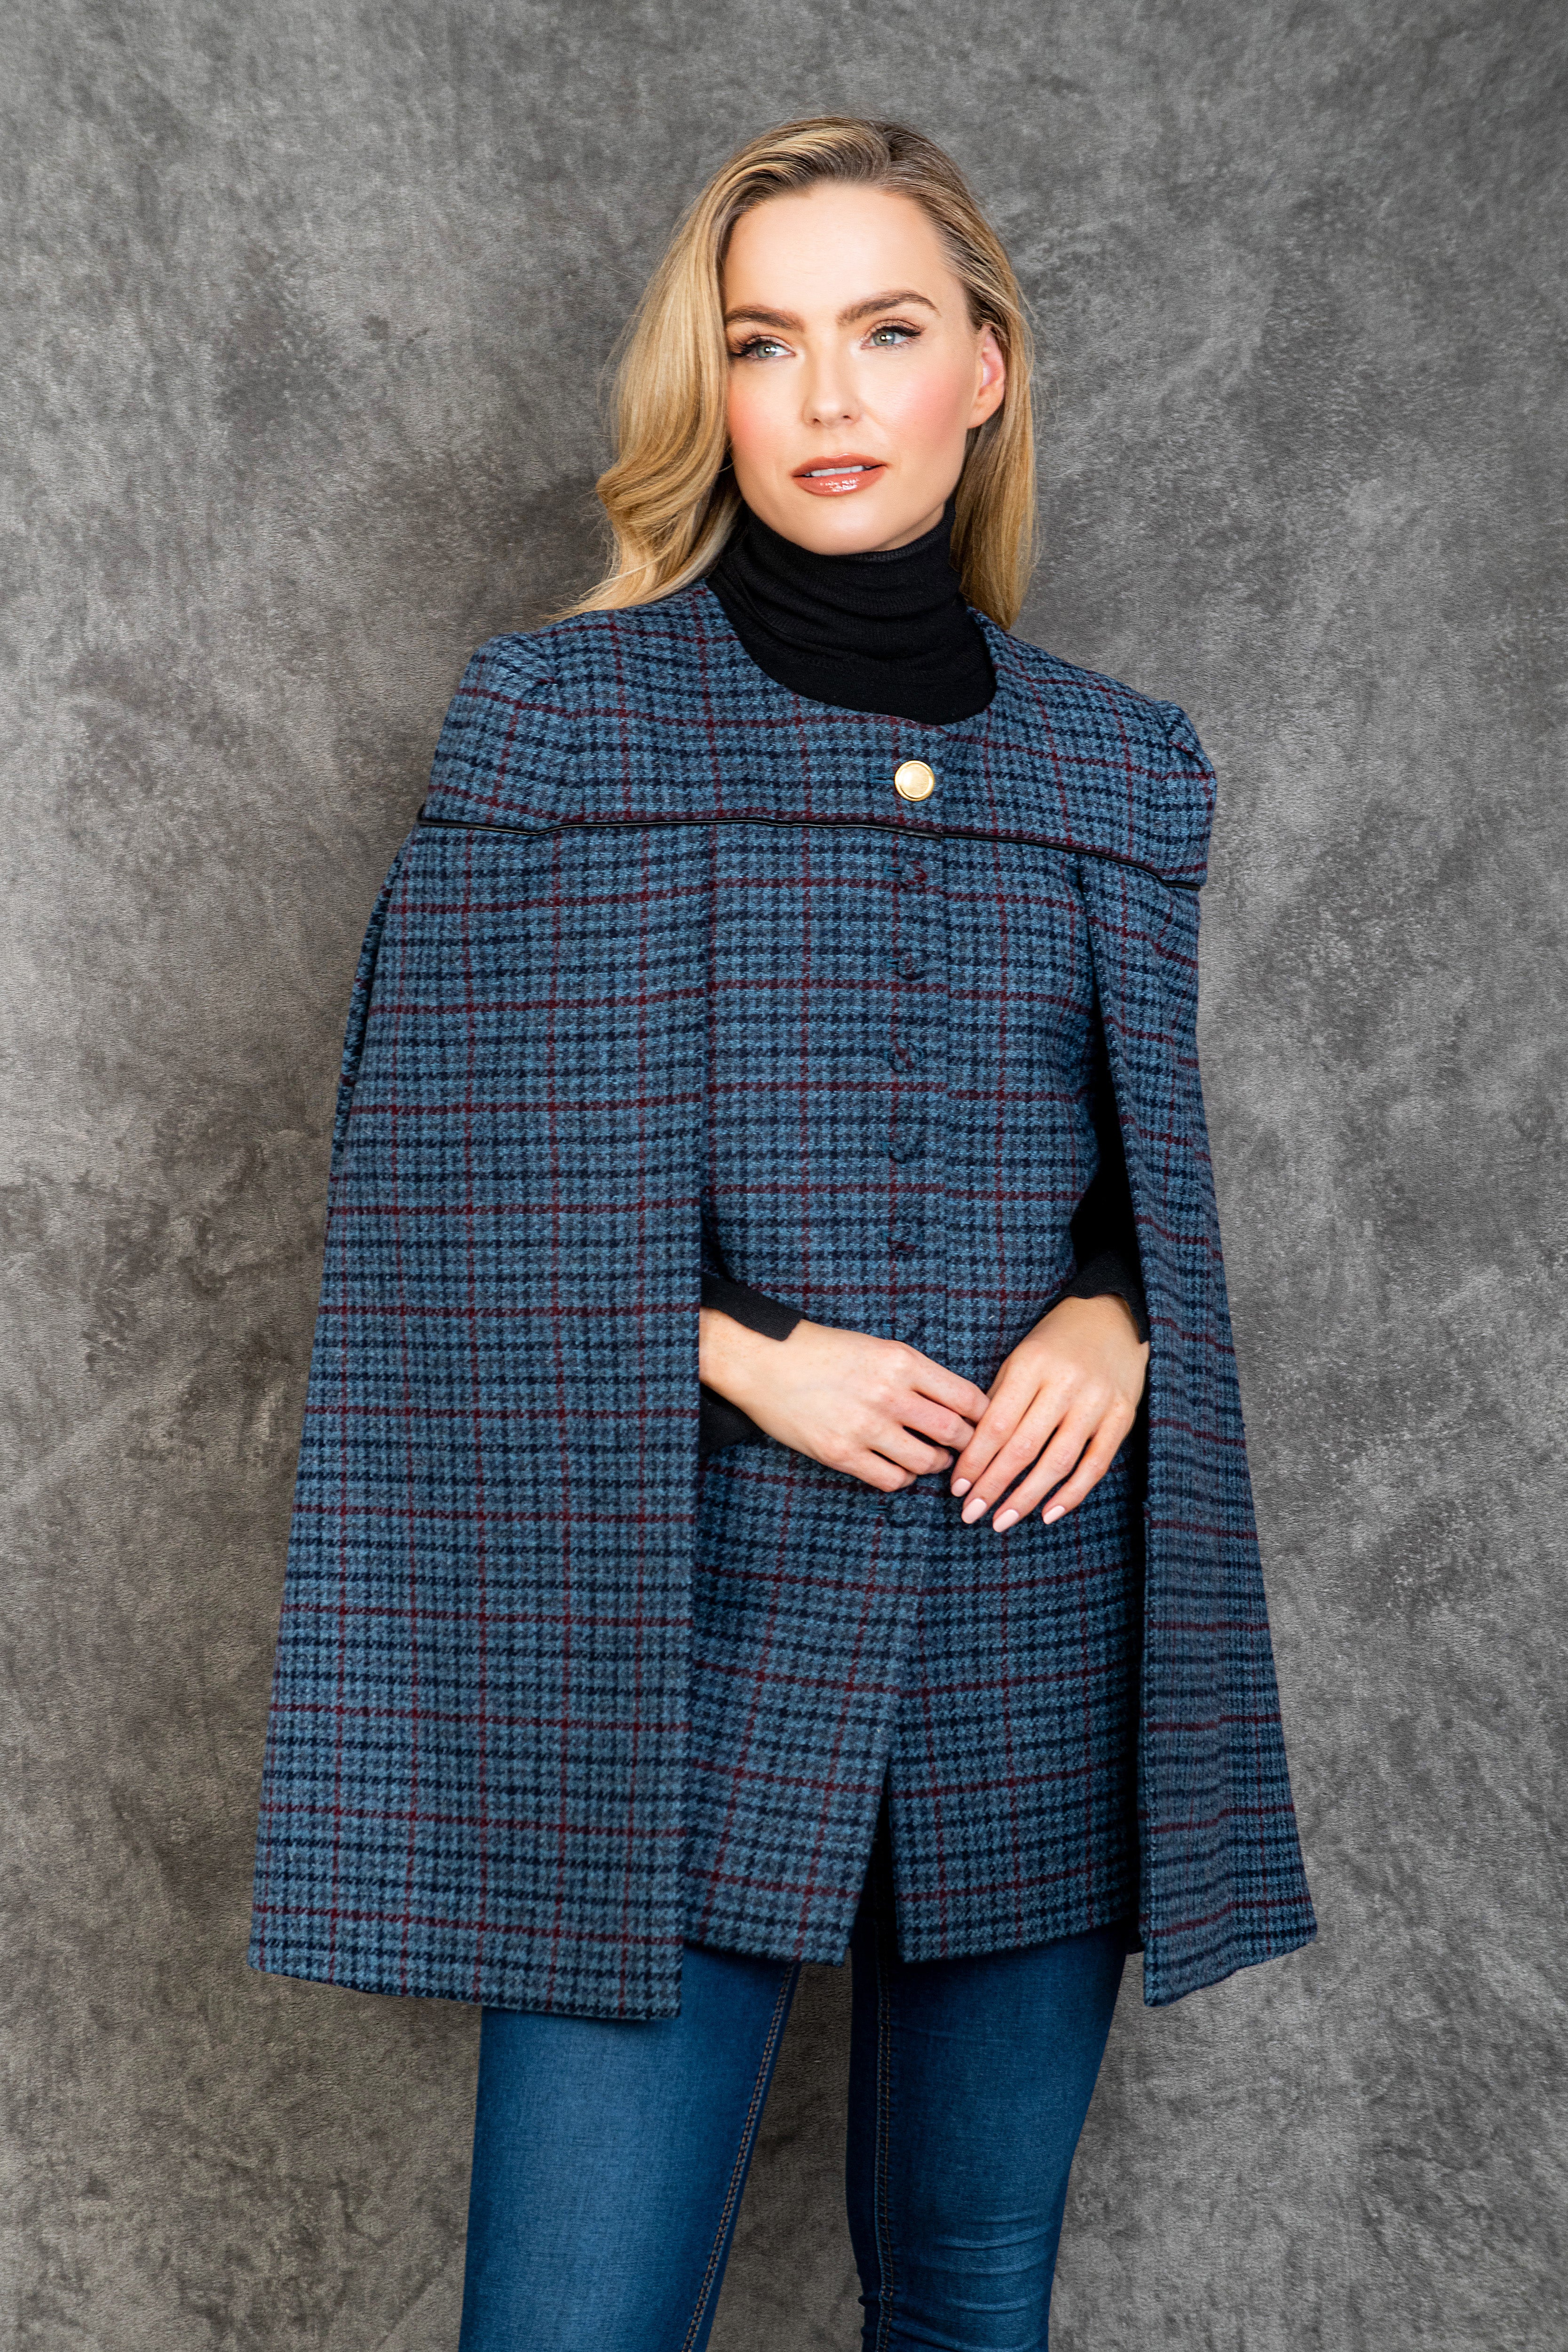 Aisling II Tailored Cape - Navy Hacking Check